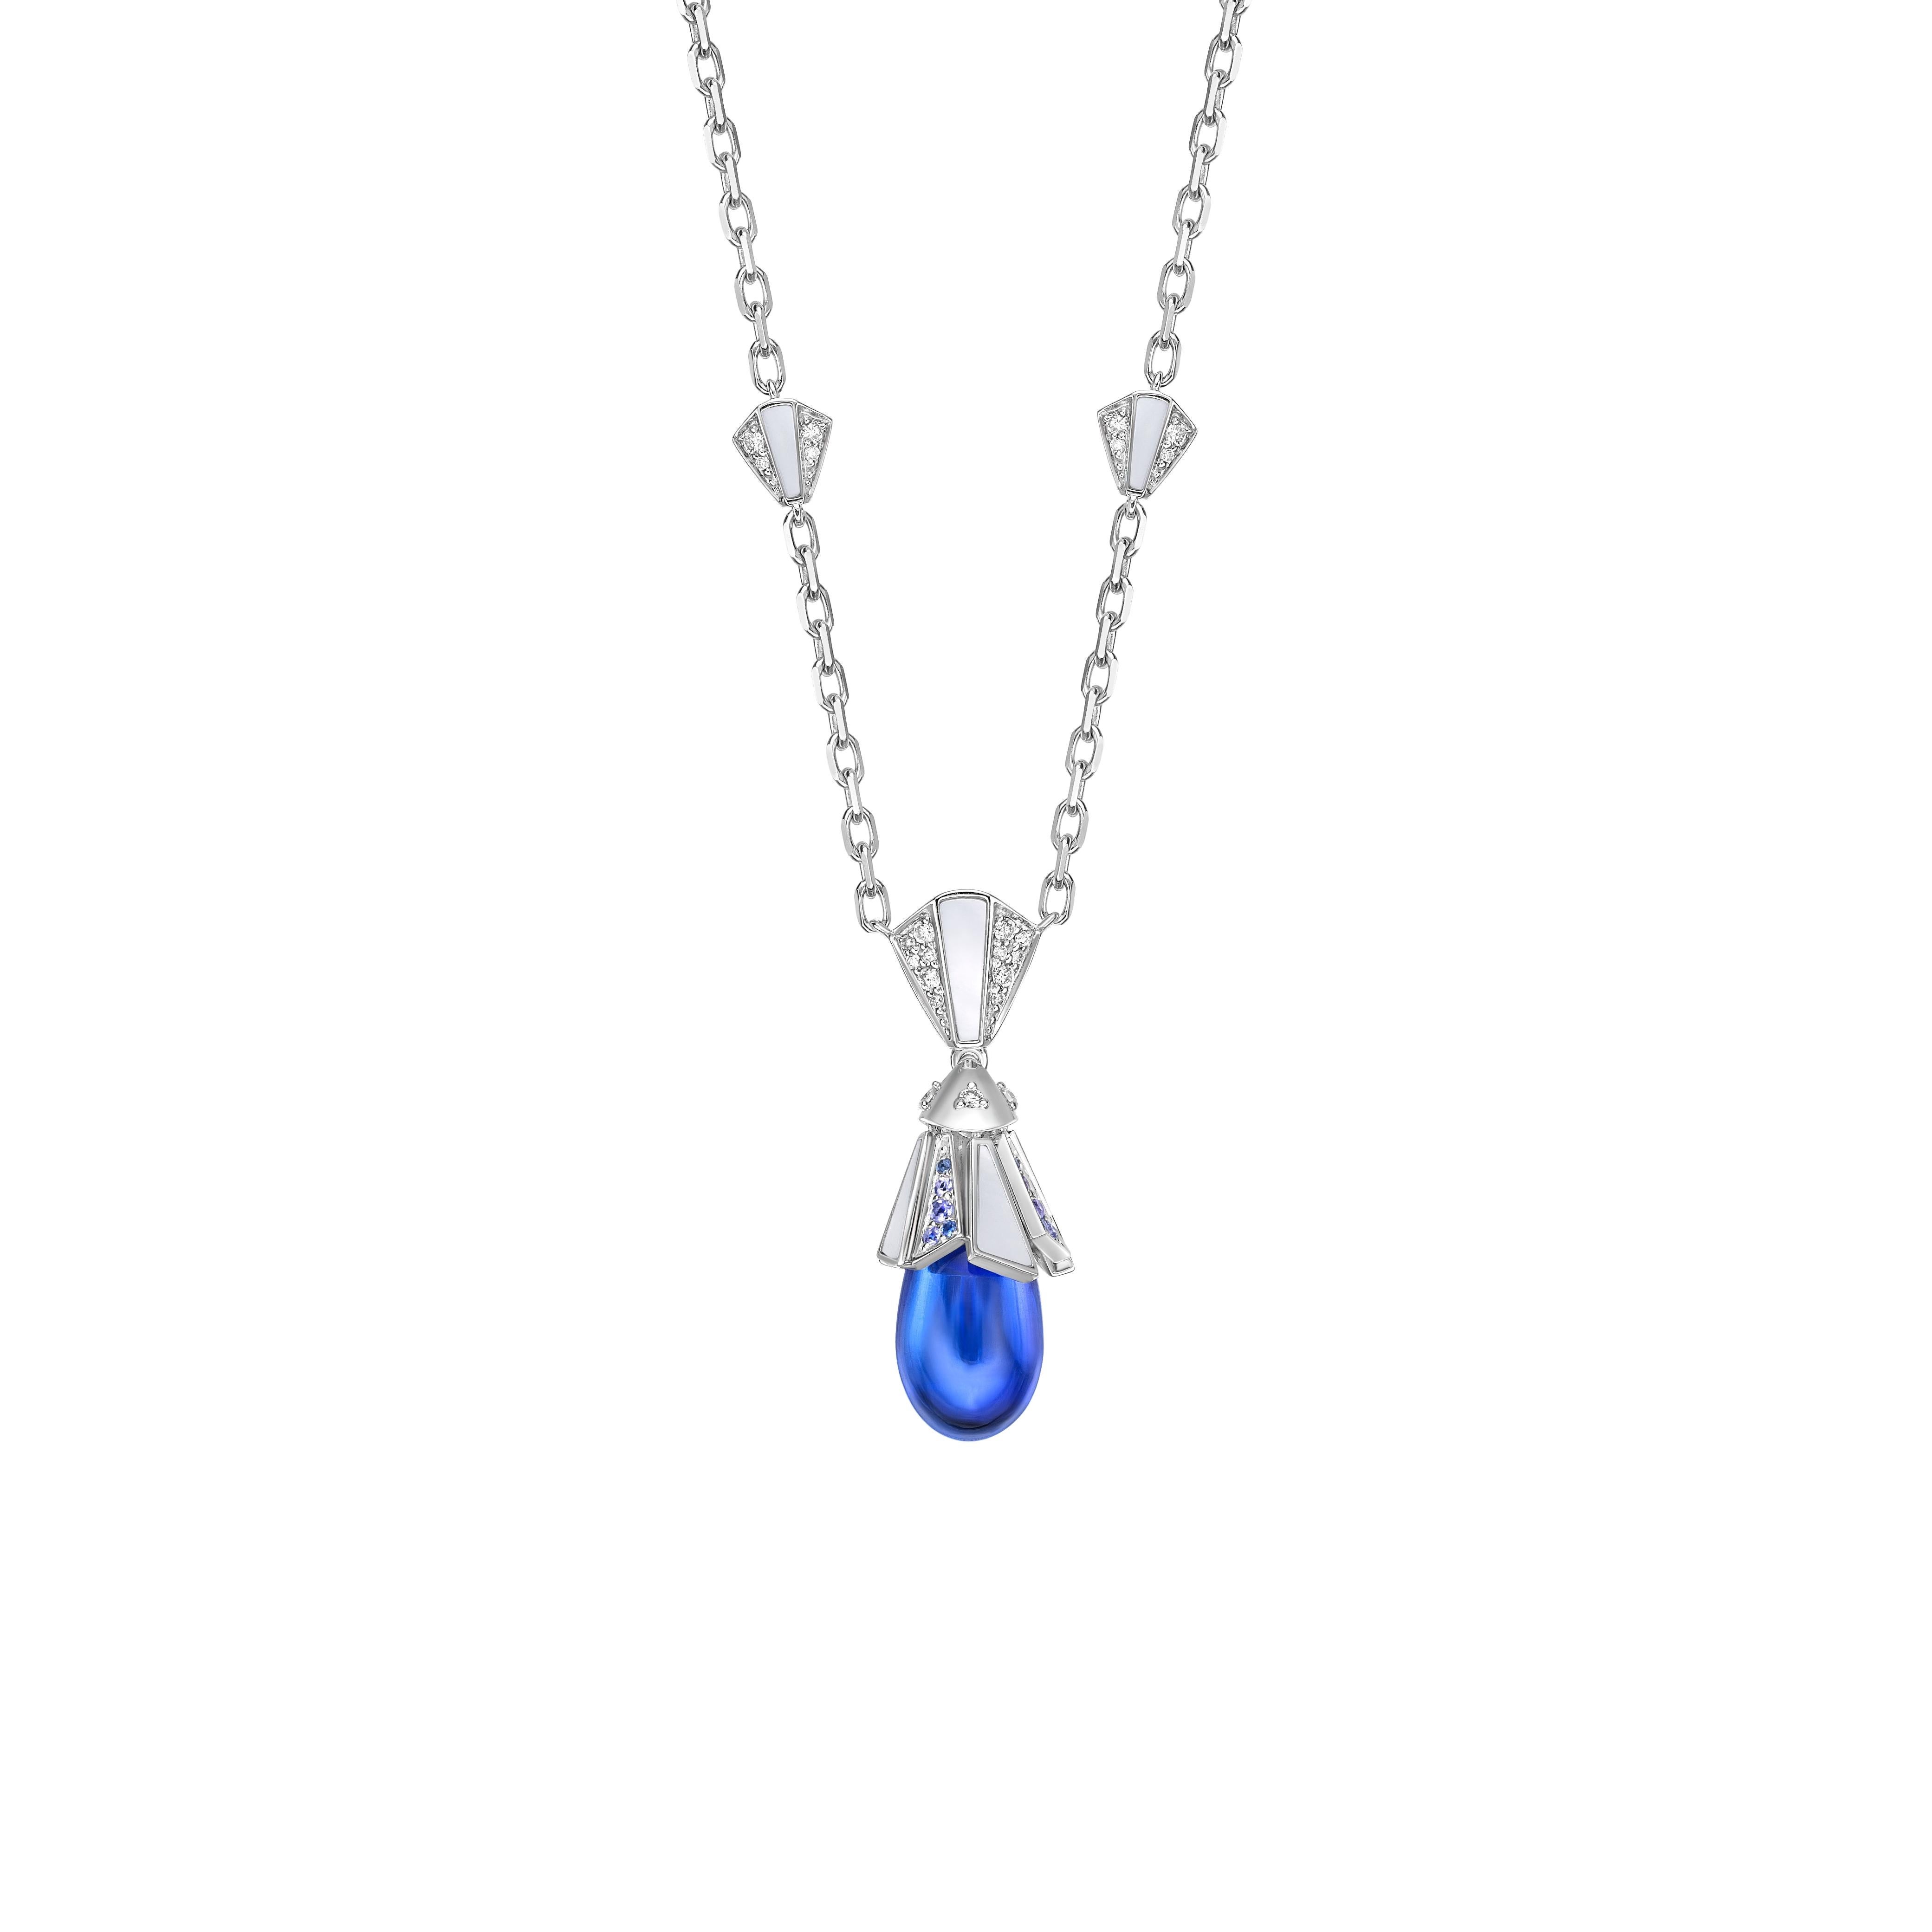 The pendant features a water drop-shaped Tanzanite stone with Tanzanite hue, adorned with mother of pearls. It's made of white gold and studded with diamonds and blue sapphire, making it suitable for any function or special moment.

Tanzanite